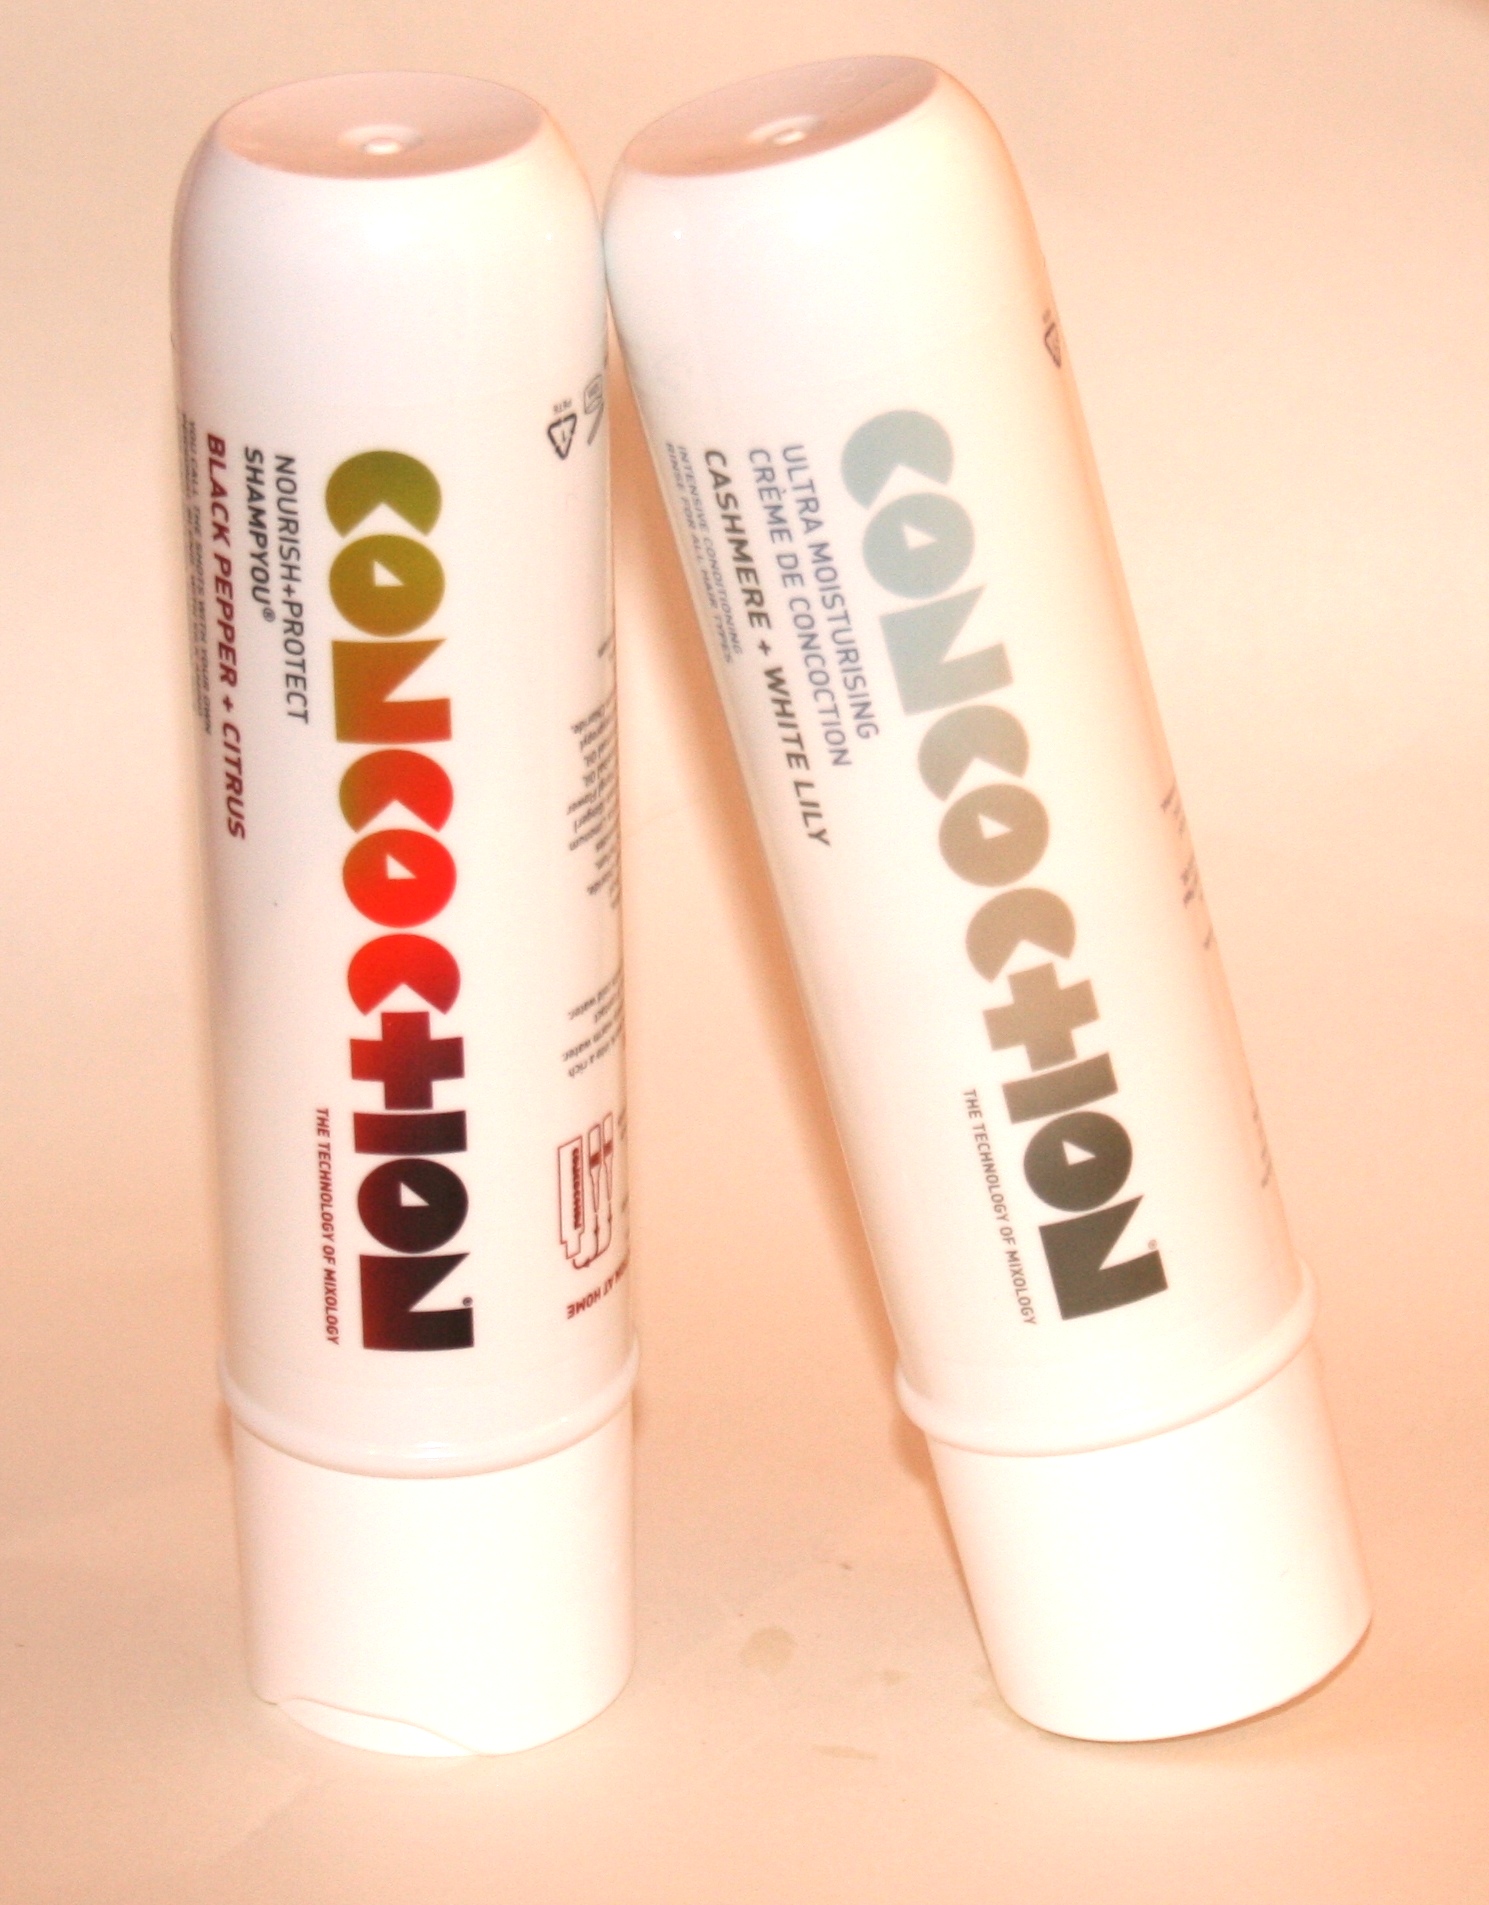 Concoction Bespoke Haircare: Shampoo and Conditioner Review